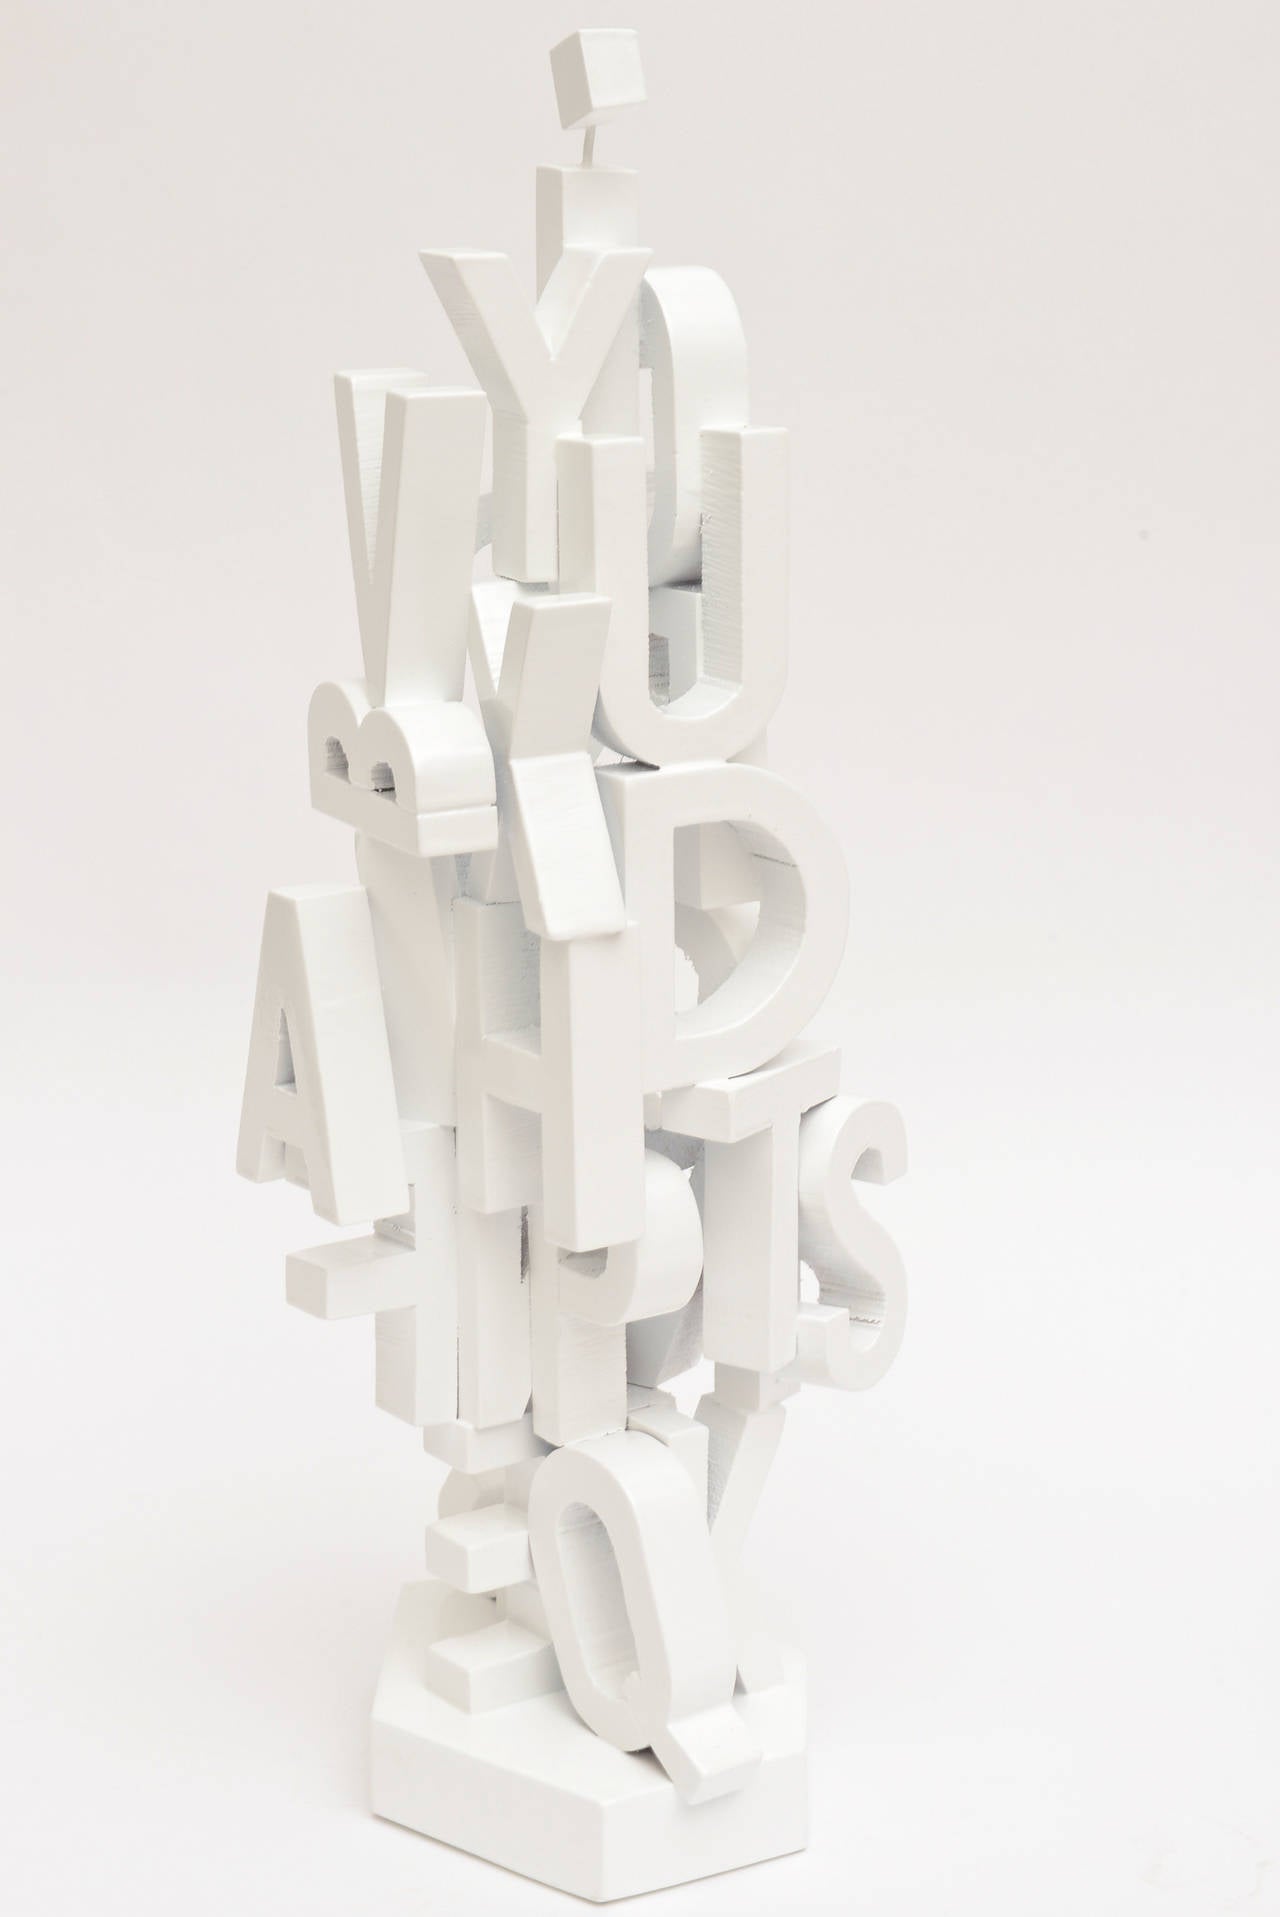 This Mid-Century white lacquered alphabet tree sculpture is vintage.
A great object or sculpture in any room.